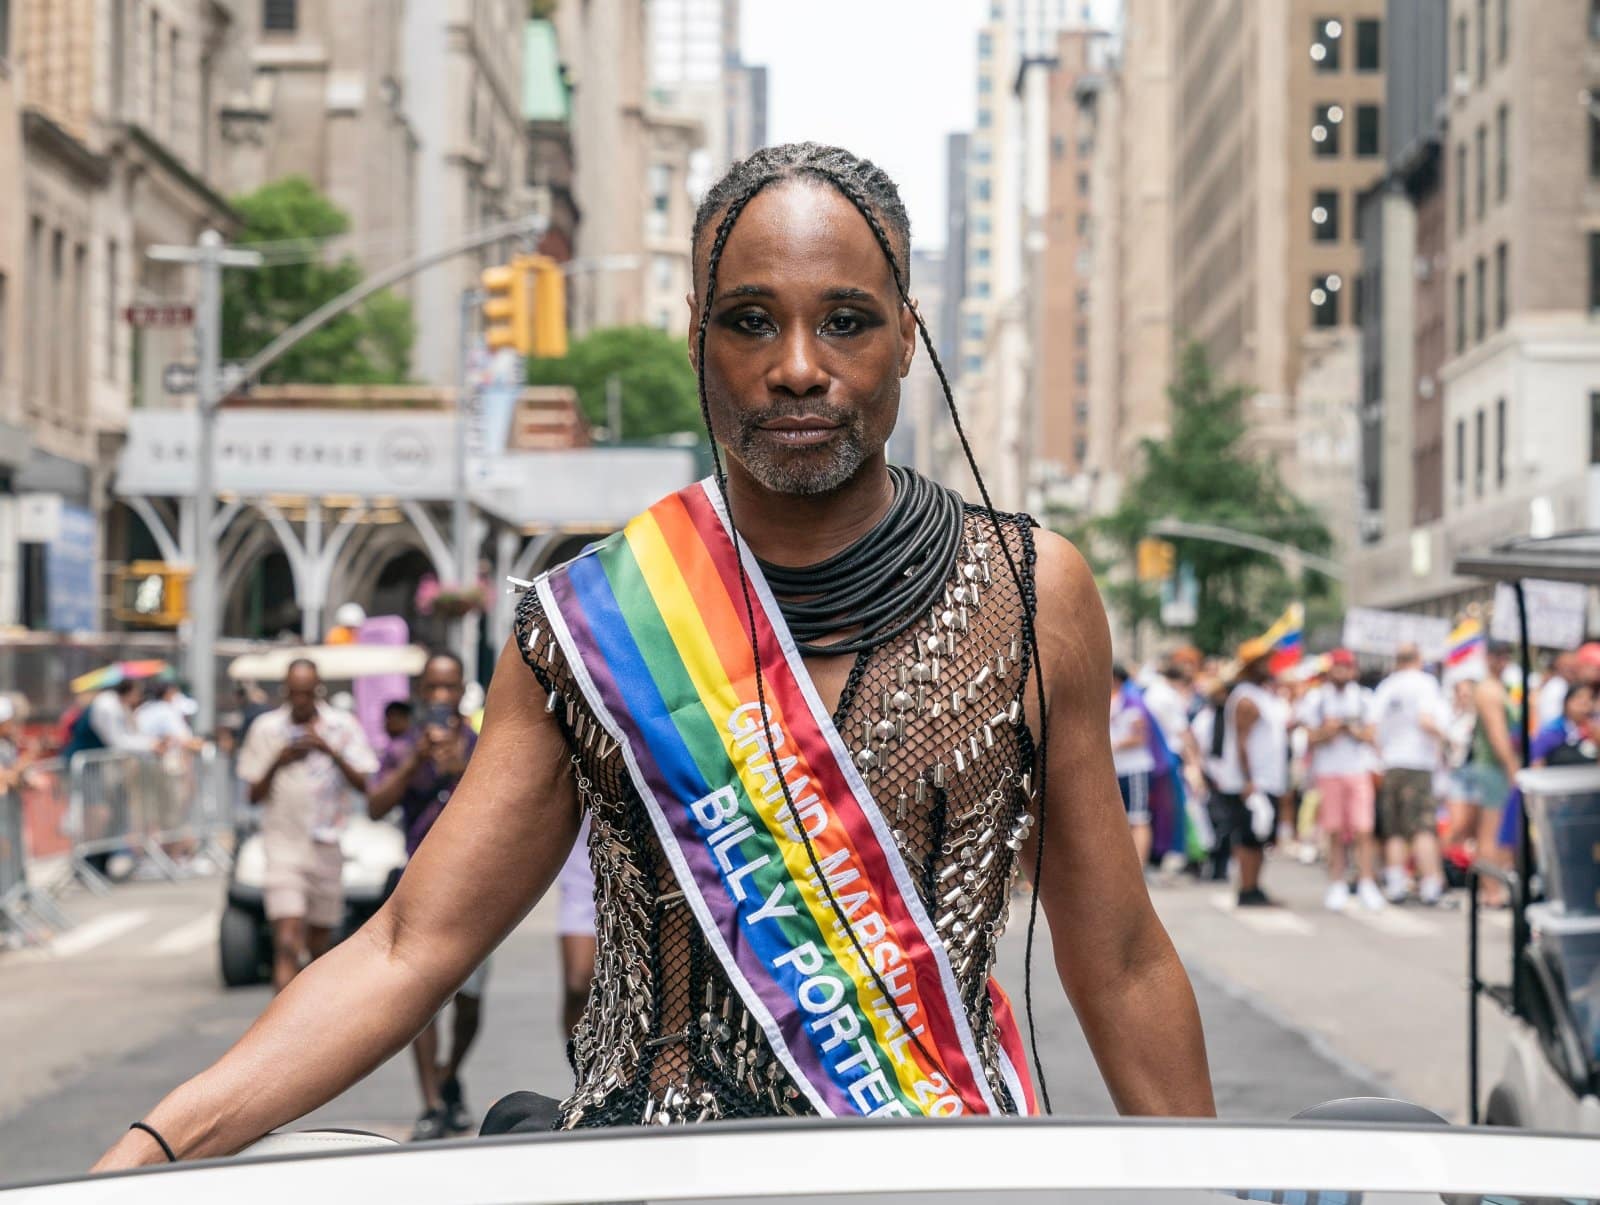 <p><span>An openly gay Black man, Porter uses his visibility to challenge gender norms and advocate for the LGBTQ+ community, often speaking on the intersectionality of race, gender, and sexuality.</span></p>